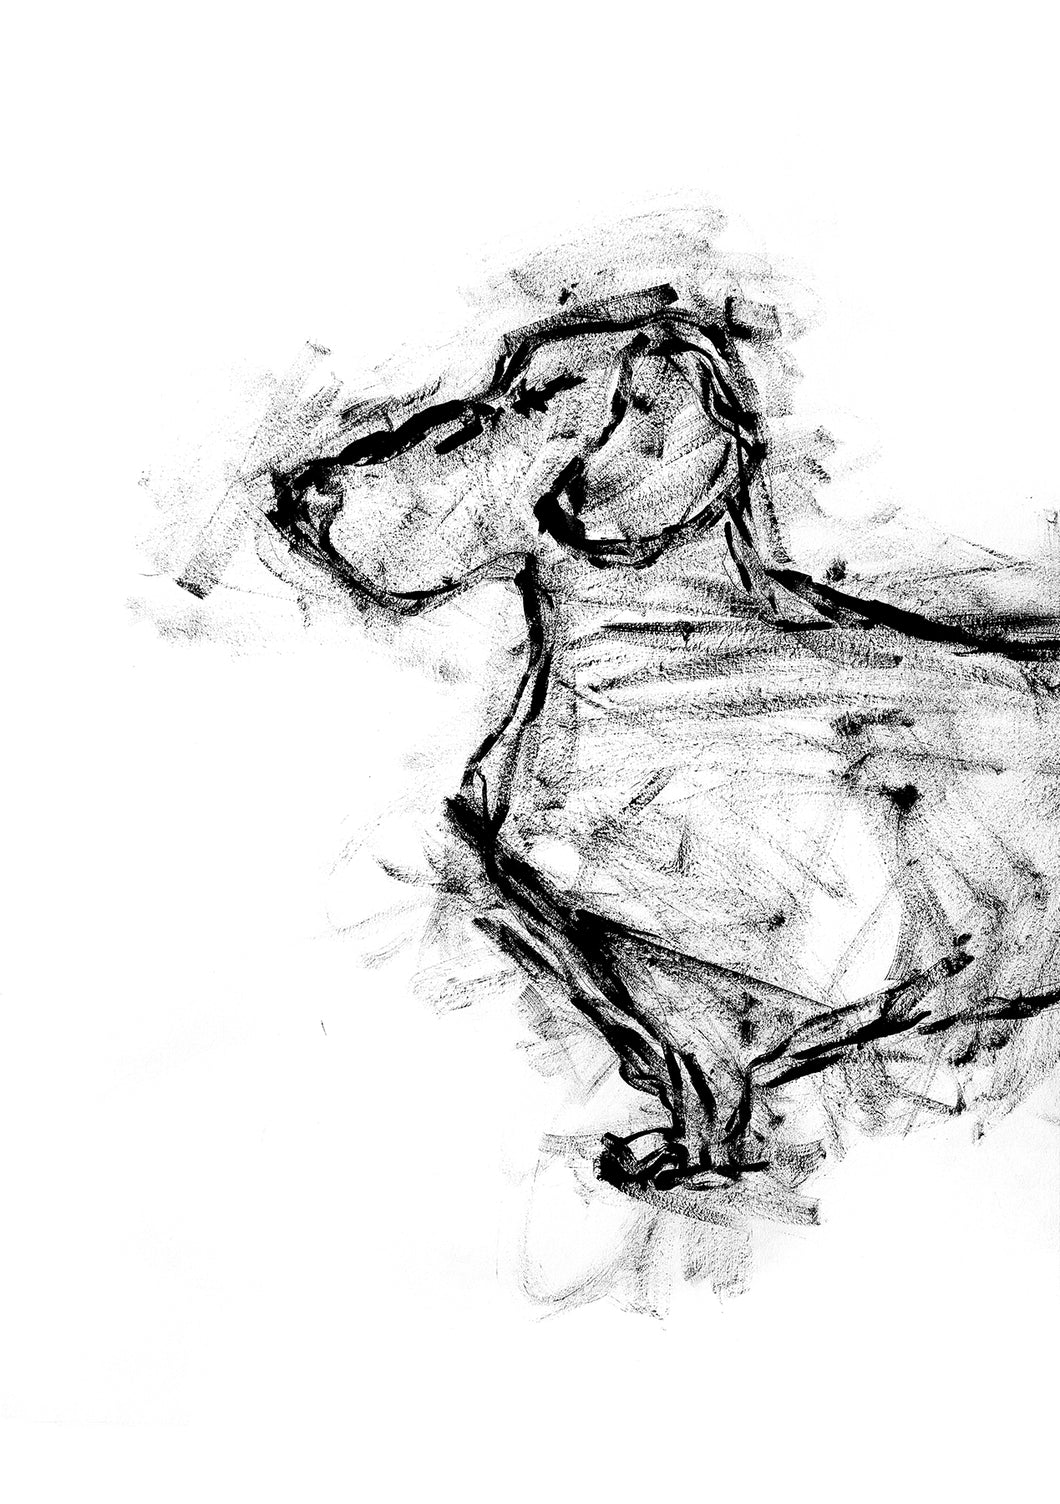 Black Dachshund - Signed print collection